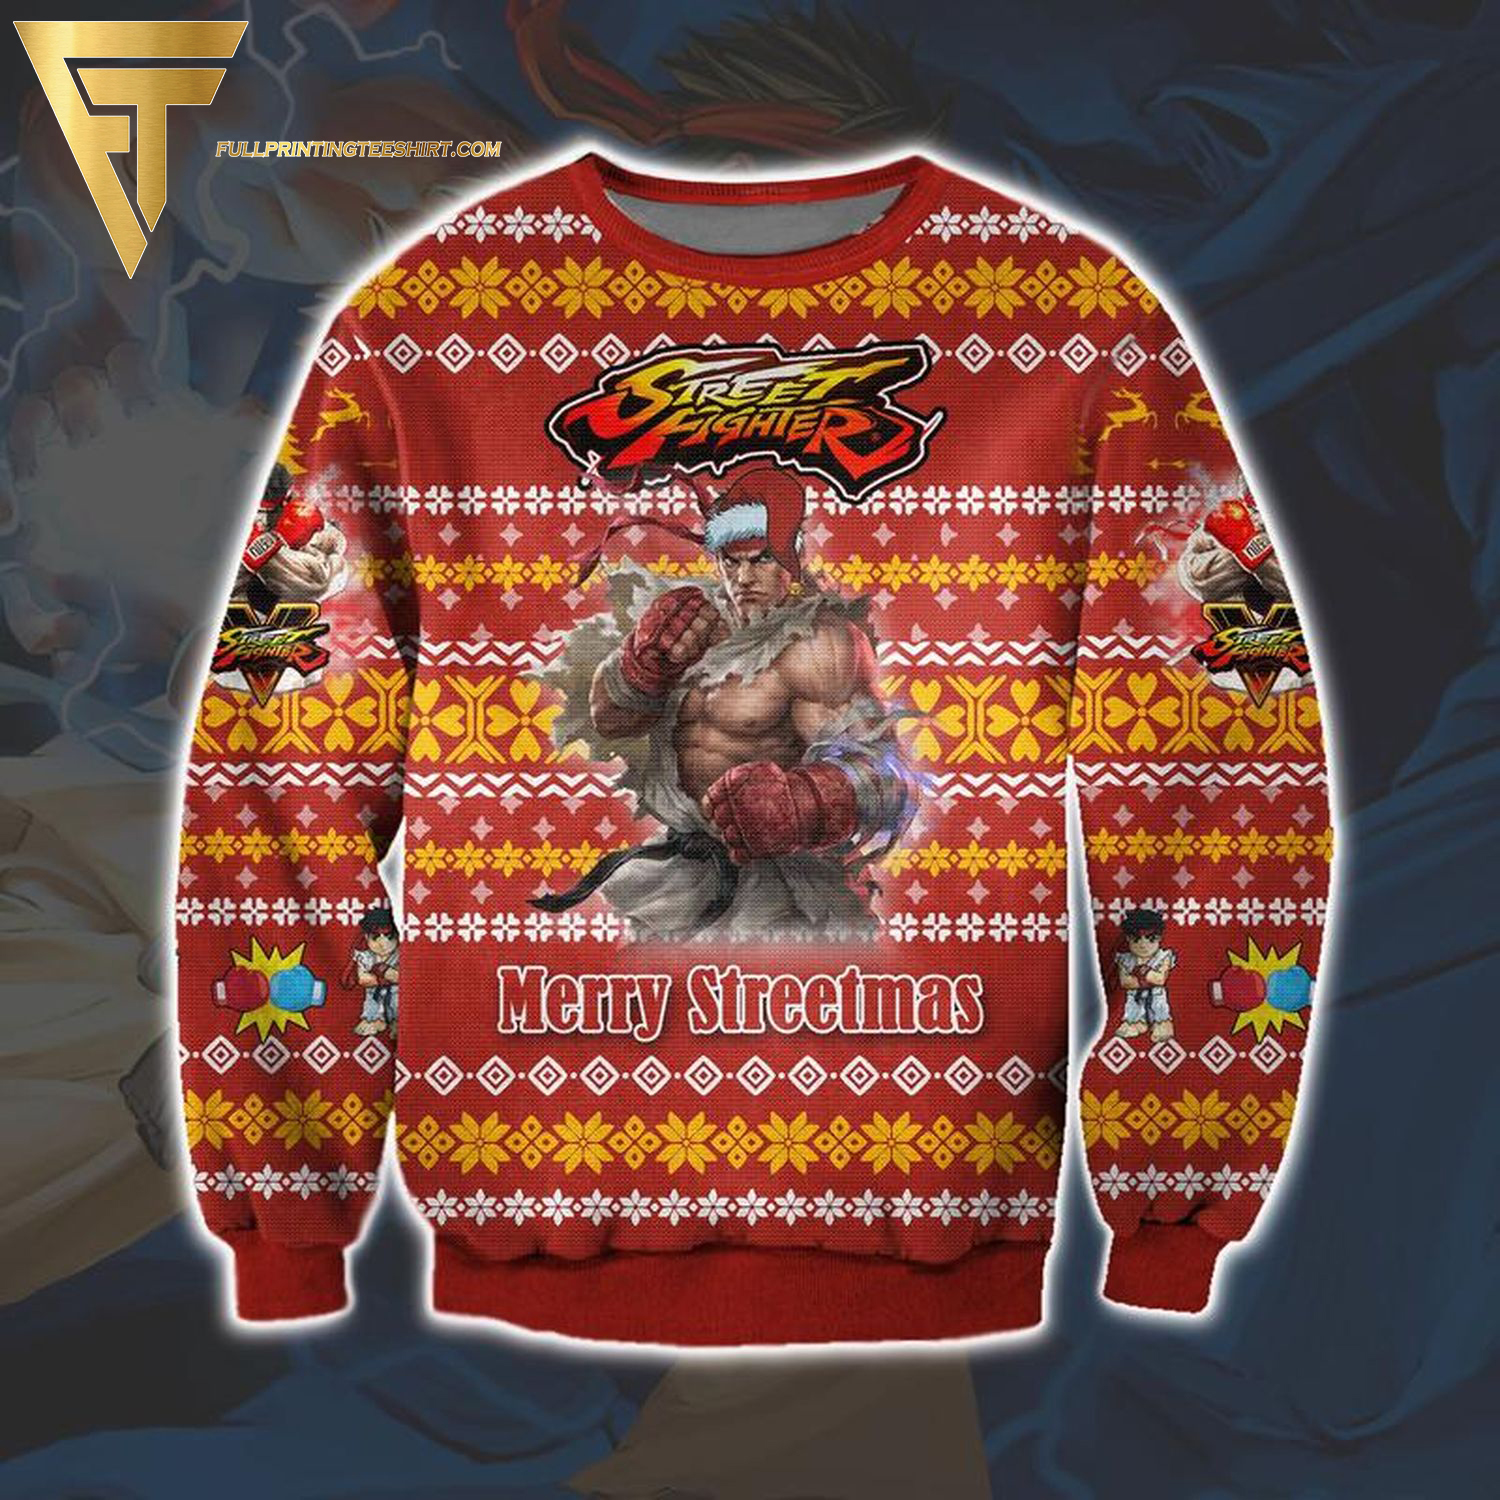 Ryu Street Fighter Full Print Ugly Christmas Sweater